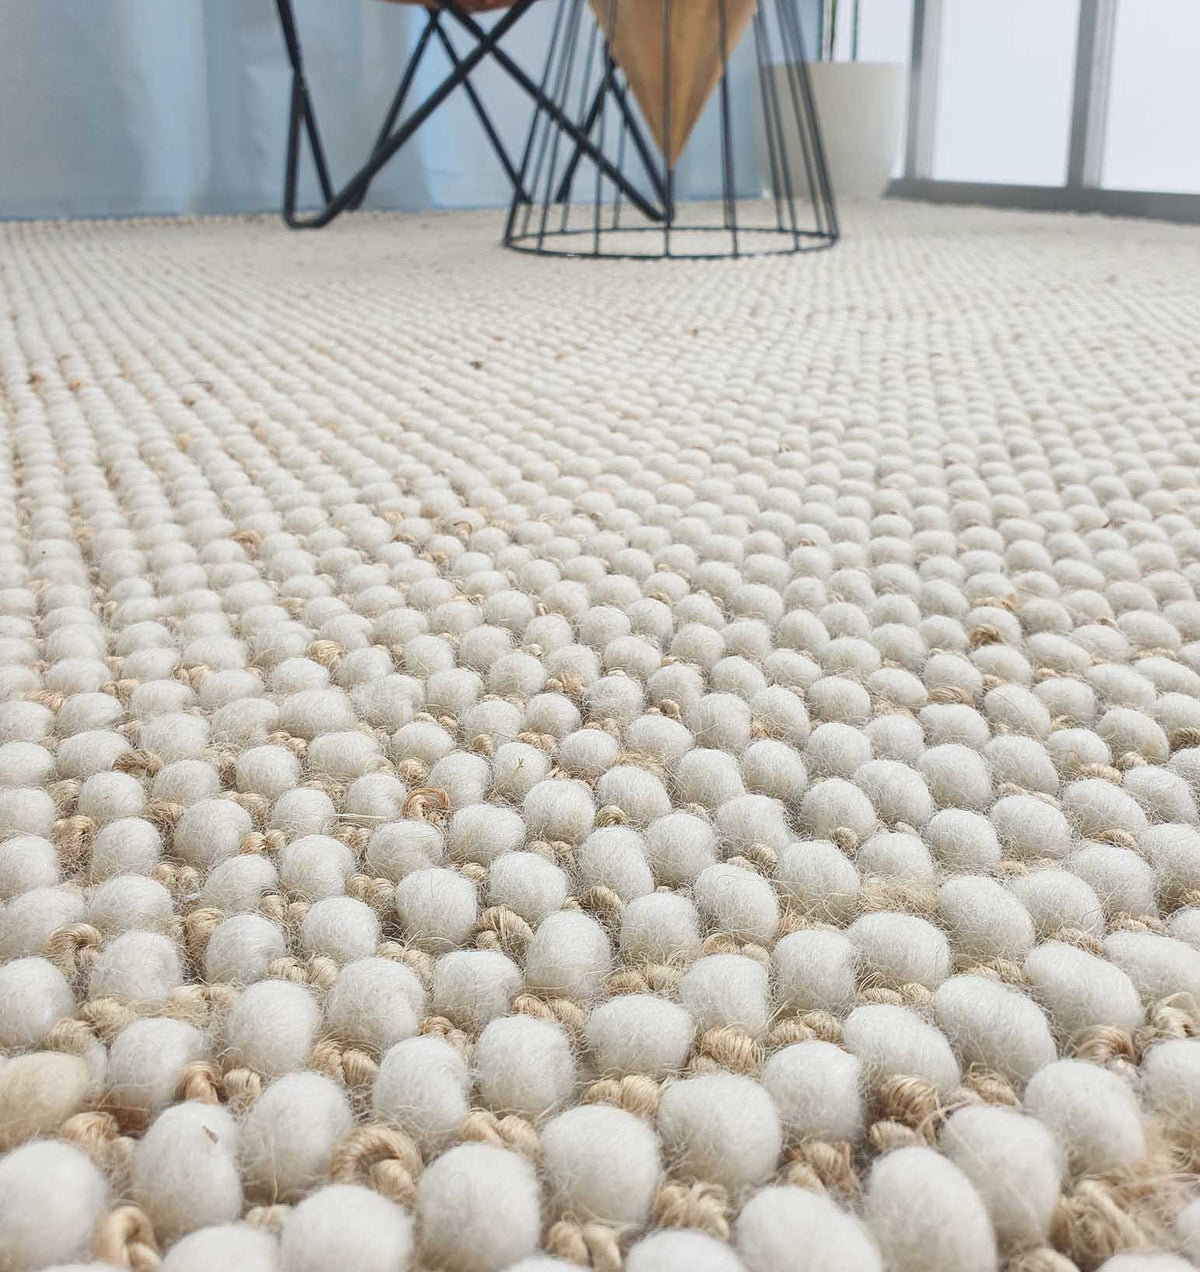 Natural White Woven Rug For Home Decore (5 Sizes)